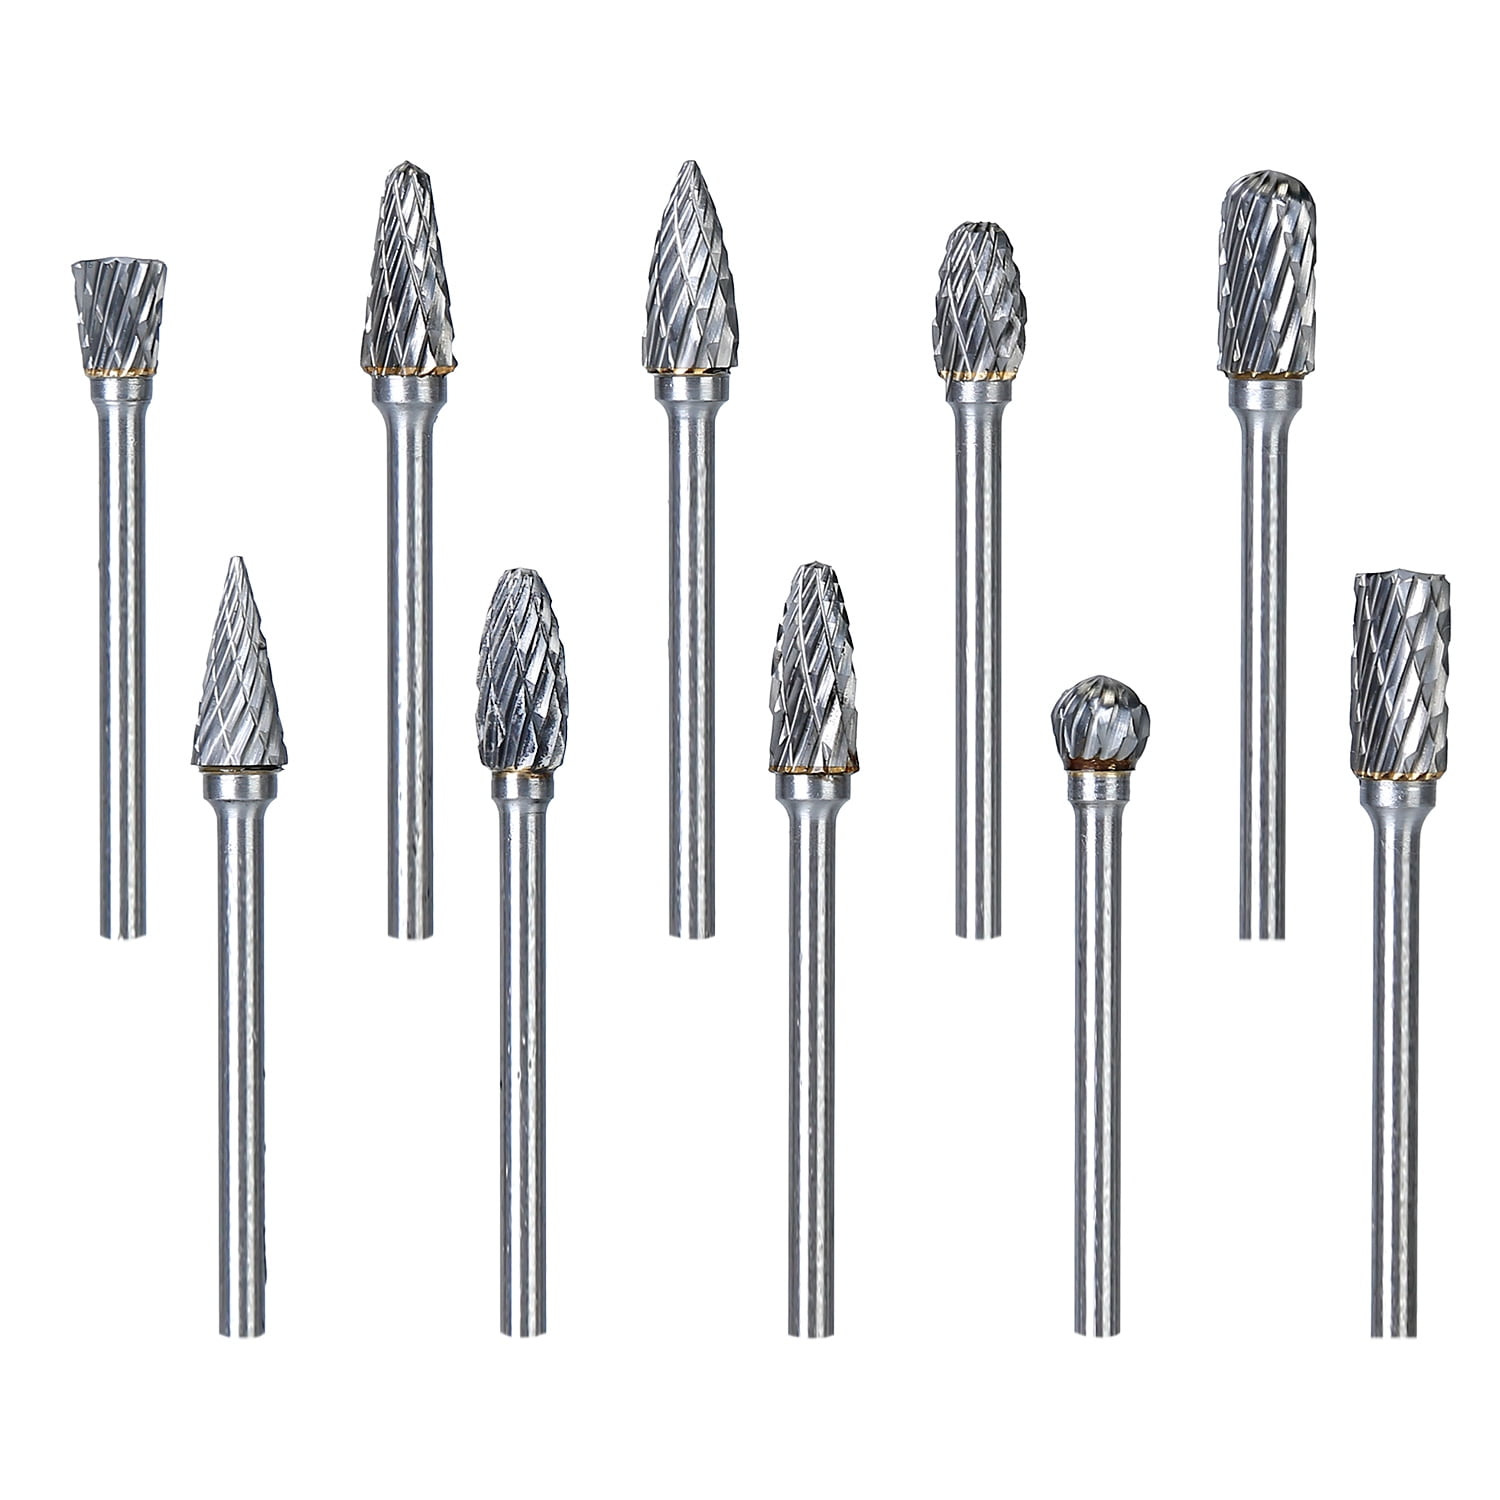 INDUSTRIAL QUALITY 6MM SHANK CARBIDE BURR 1/4" DIA DOUBLE CUT SH-1 ROTARY TOOLS 